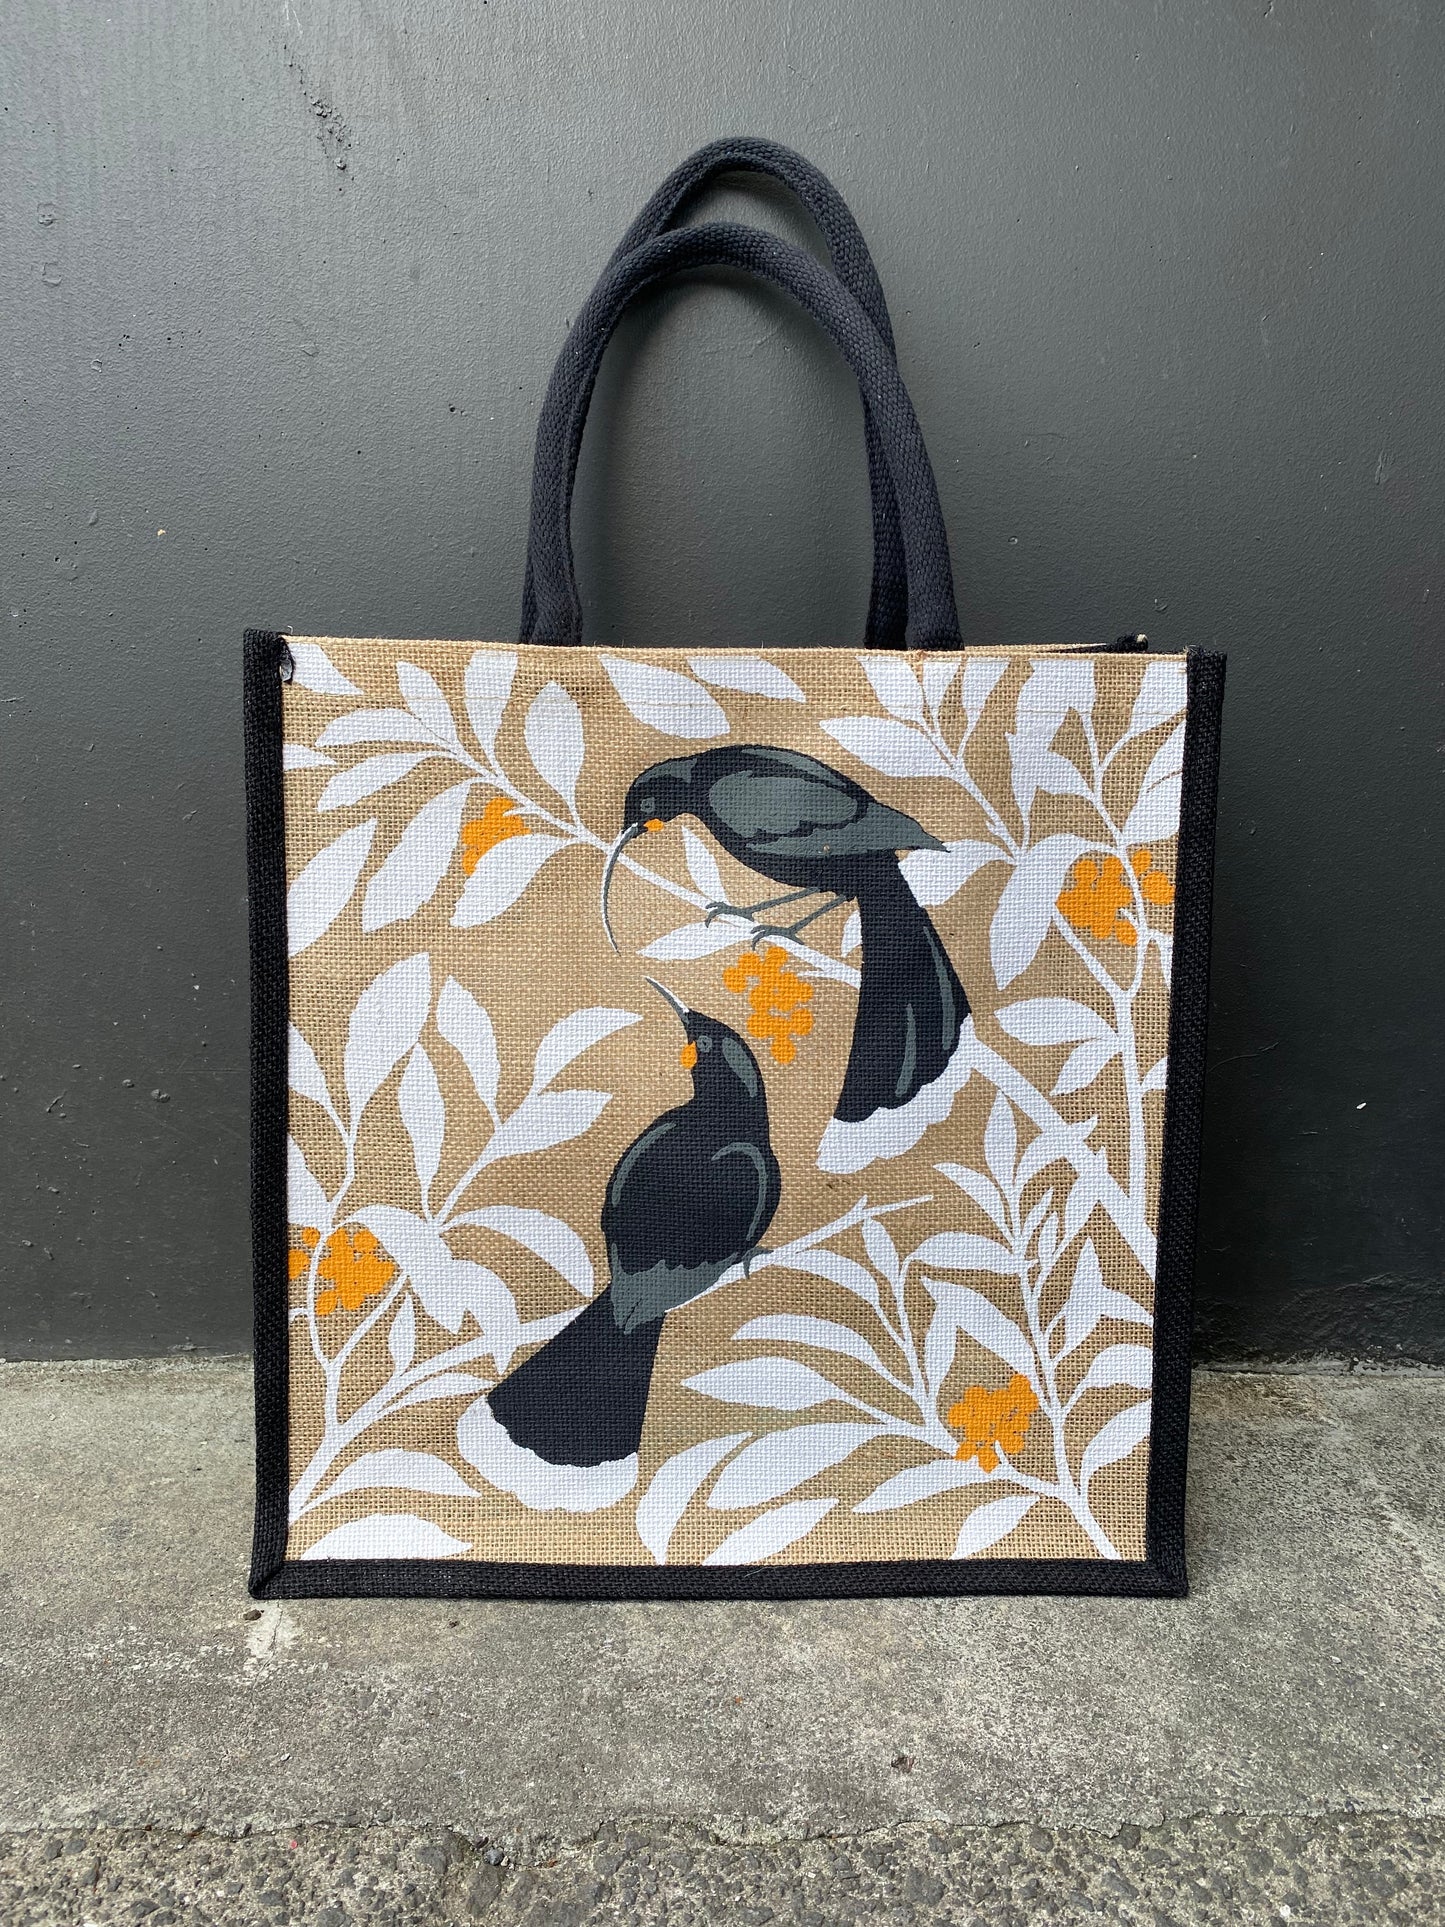 Huia print jute tote bag by Hansby Design, New Zealand artist